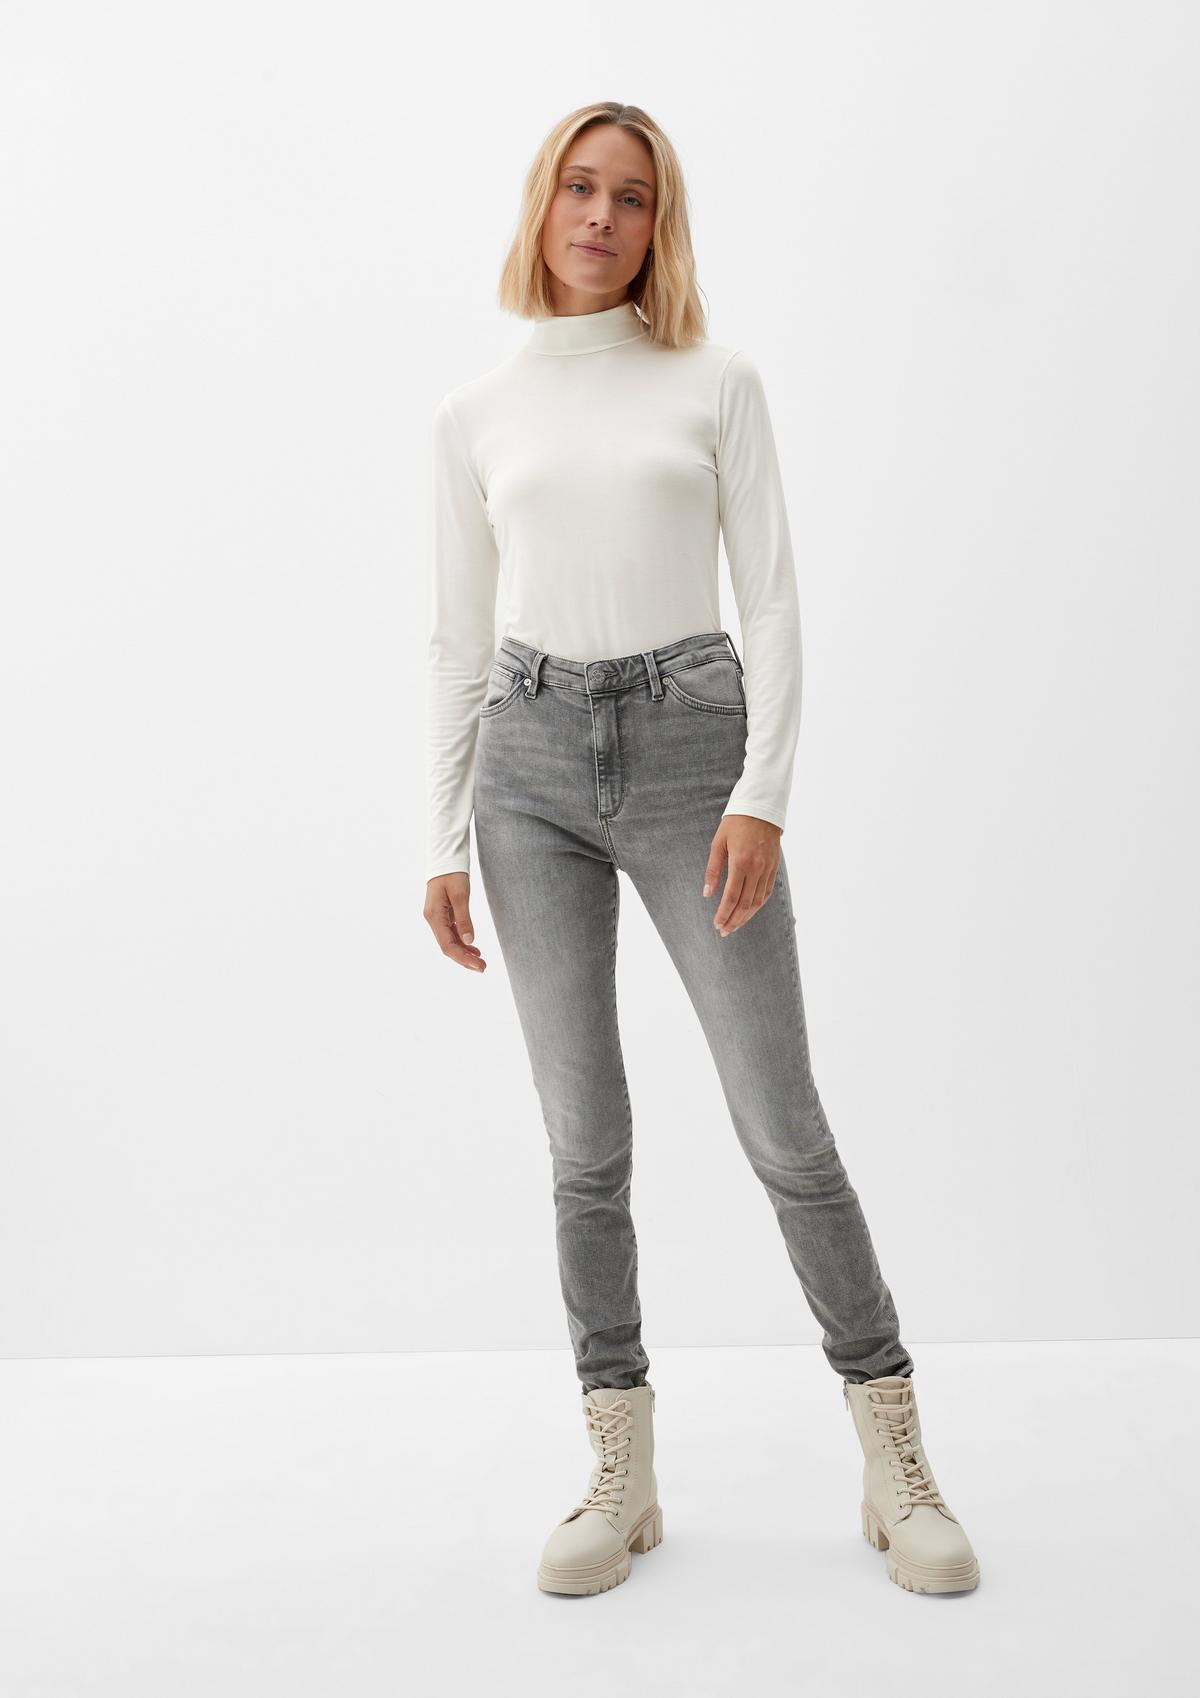 s.Oliver Long sleeve top in stretch viscose